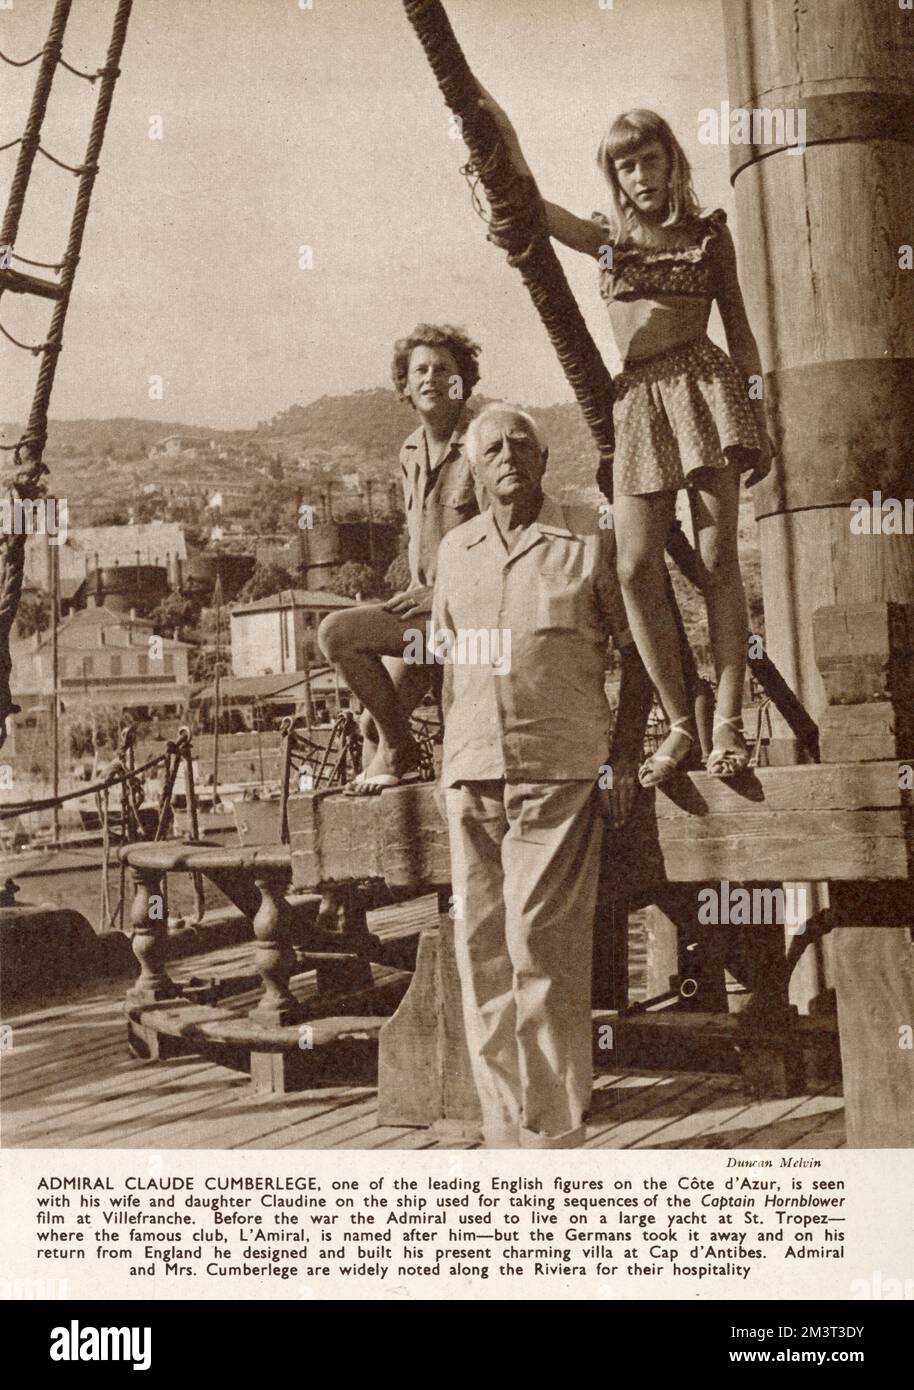 Rear Admiral Claude Lionel Cumberlege (1877 - 1962), with wife Nora and daughter Claudine on the Cote d’Azur, French Riviera, France, on board the ship used for taking sequences of the Captain Hornblower film at Villefranche. Stock Photo